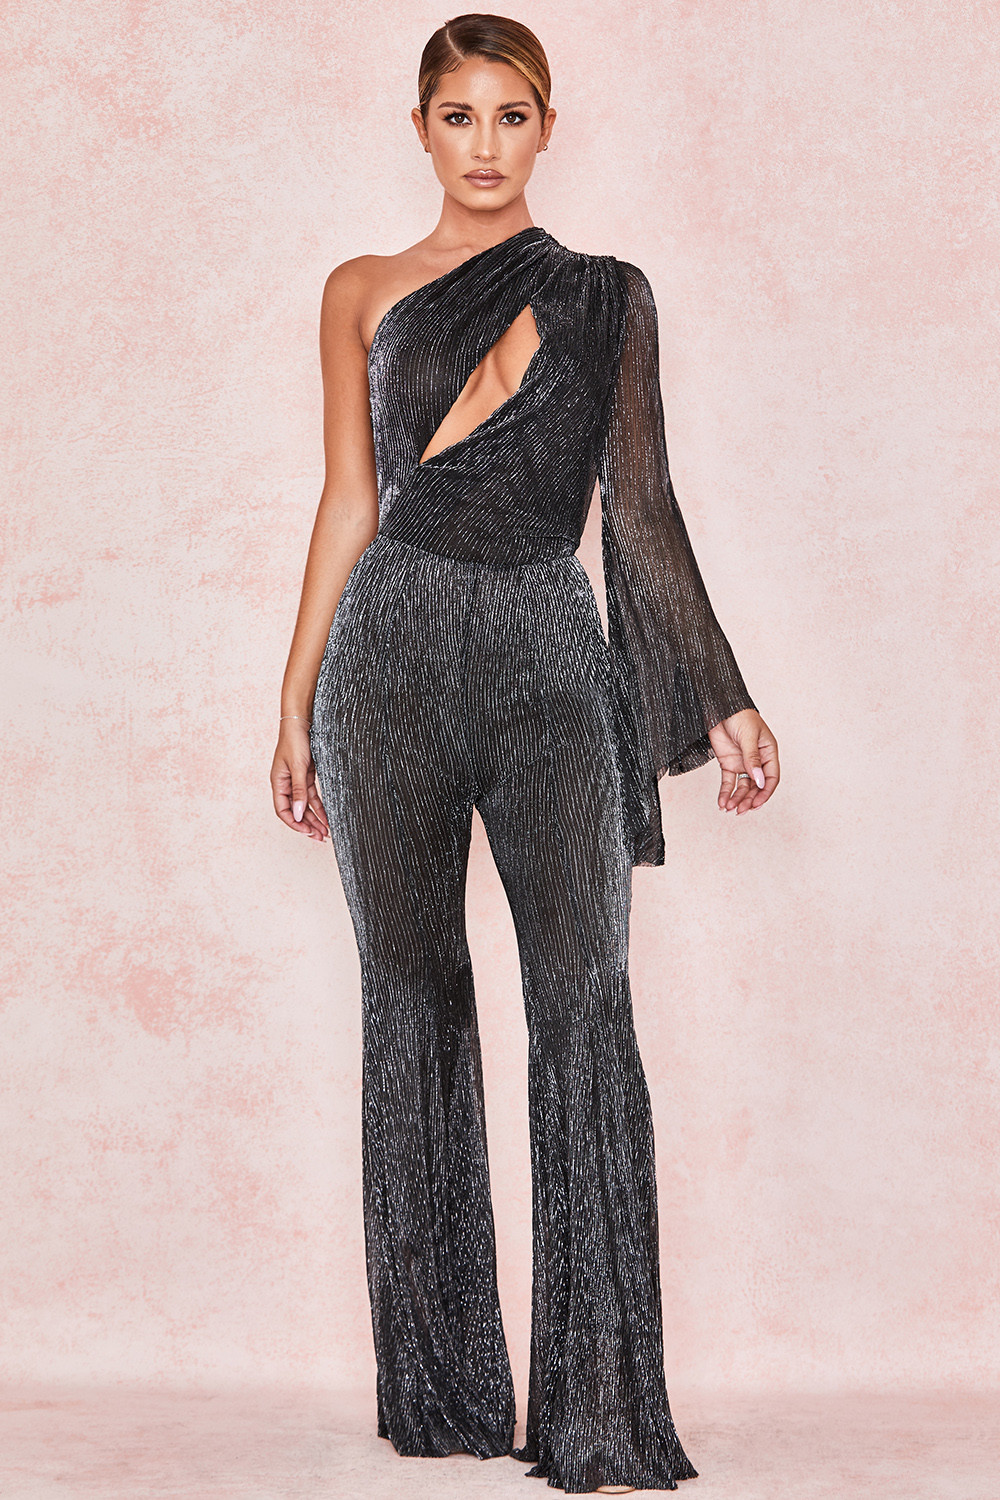 Clothing : Jumpsuits : 'Yerina' Luxurious Micropleat Jumpsuit